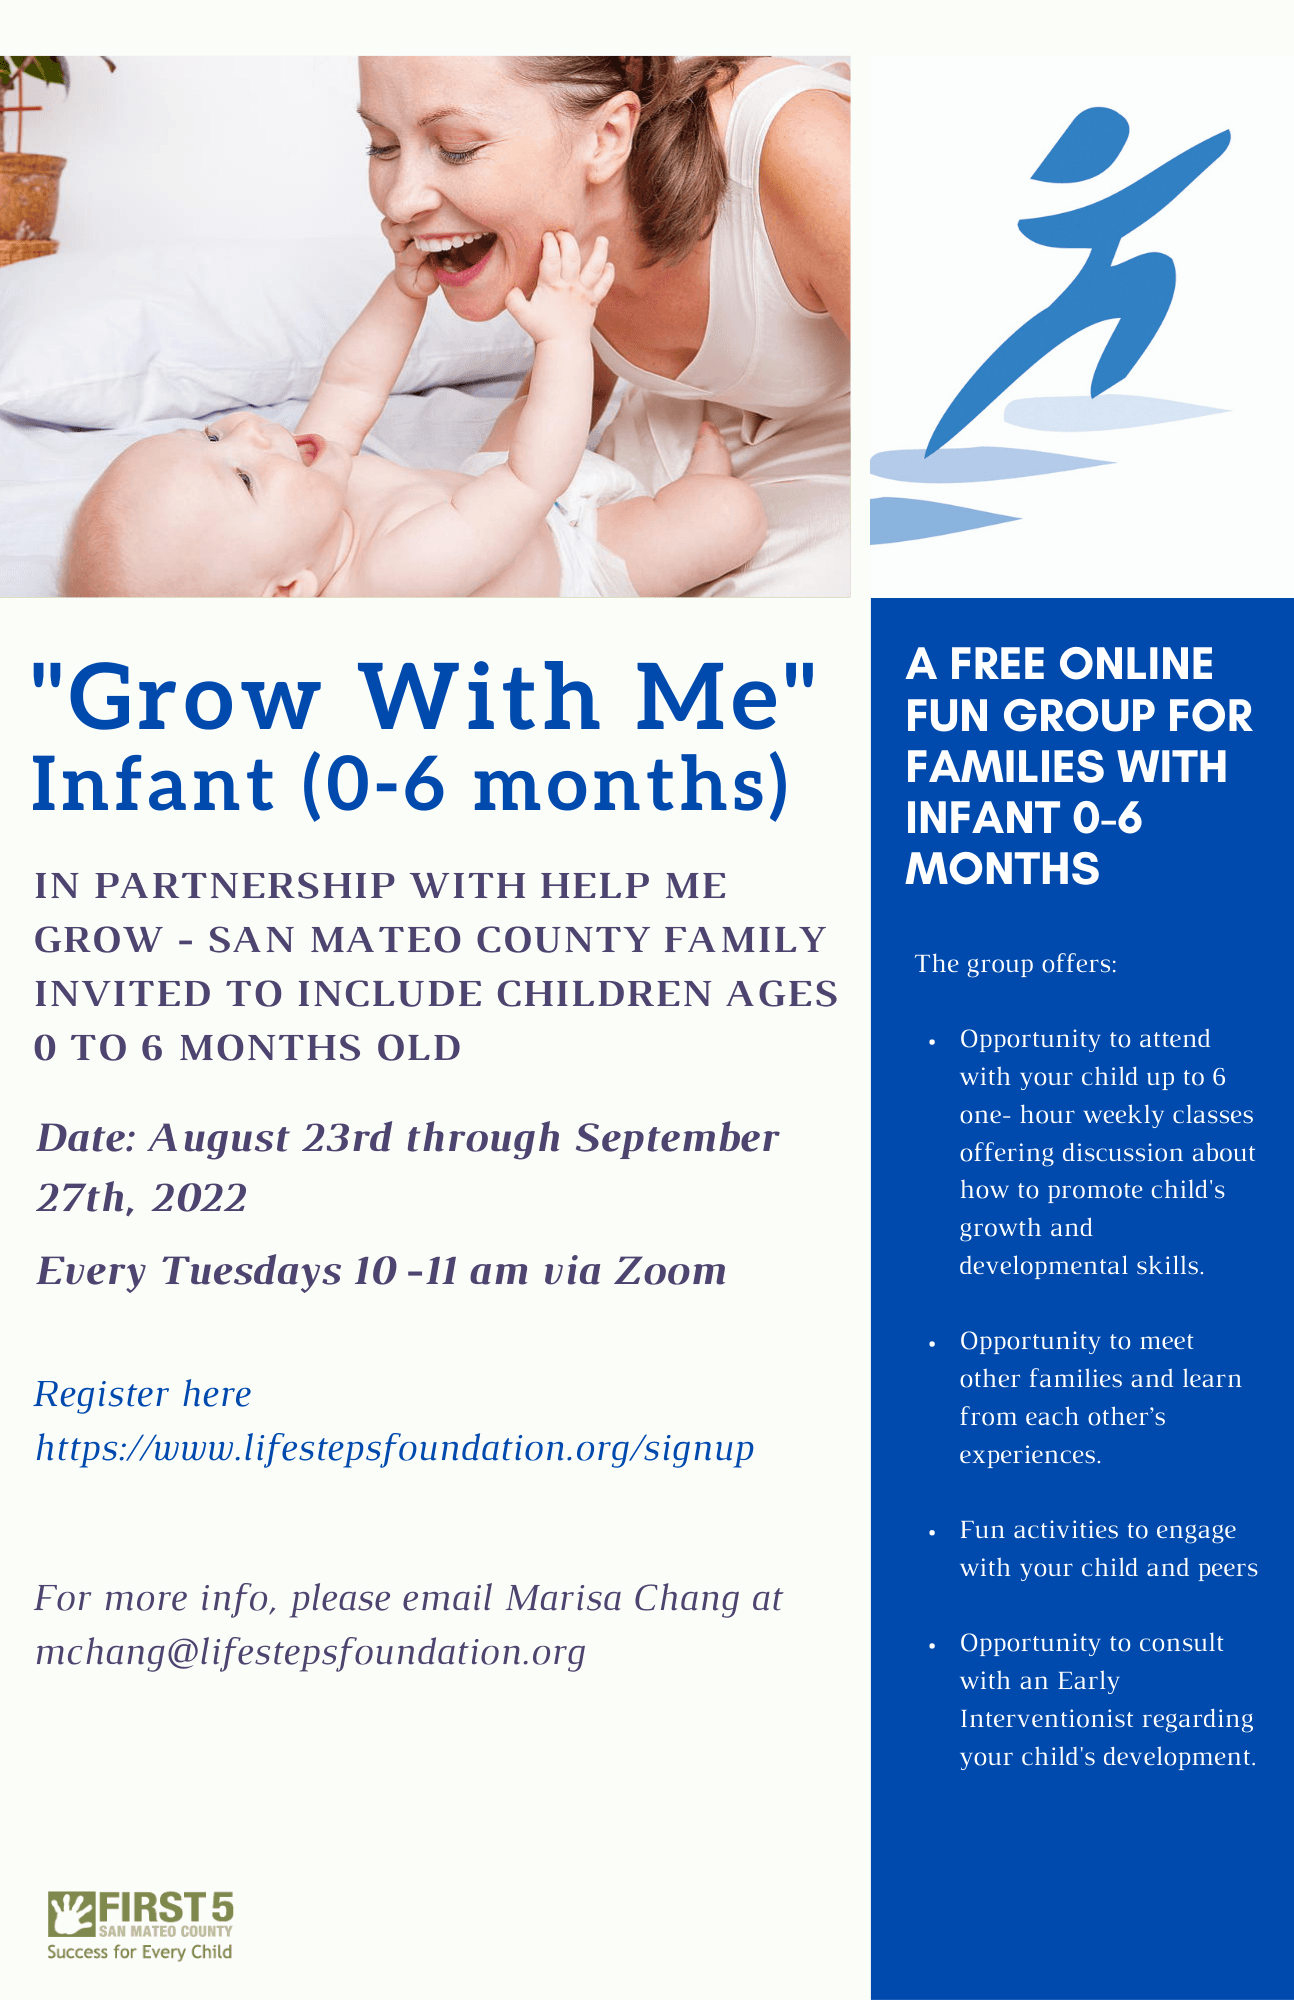 Grow With Me Playgroup for Infants